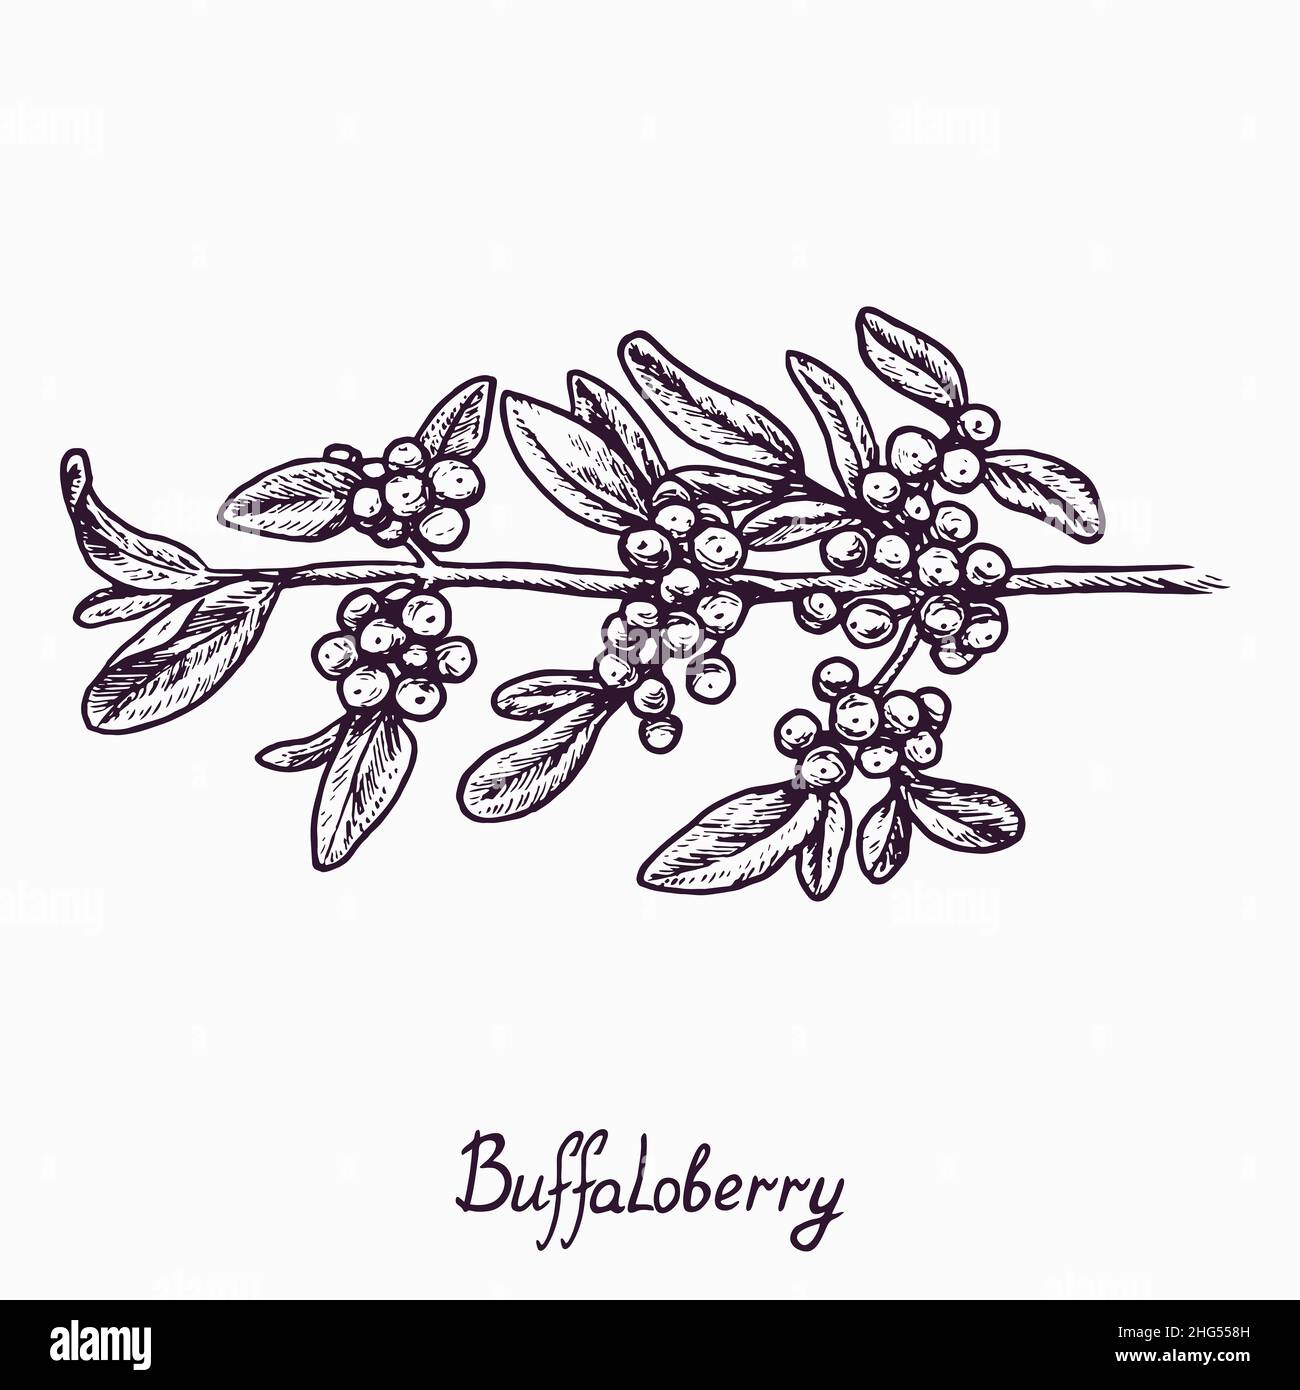 Buffaloberry branch with berries and leaves, outline simple doodle drawing with inscription, gravure style Stock Photo